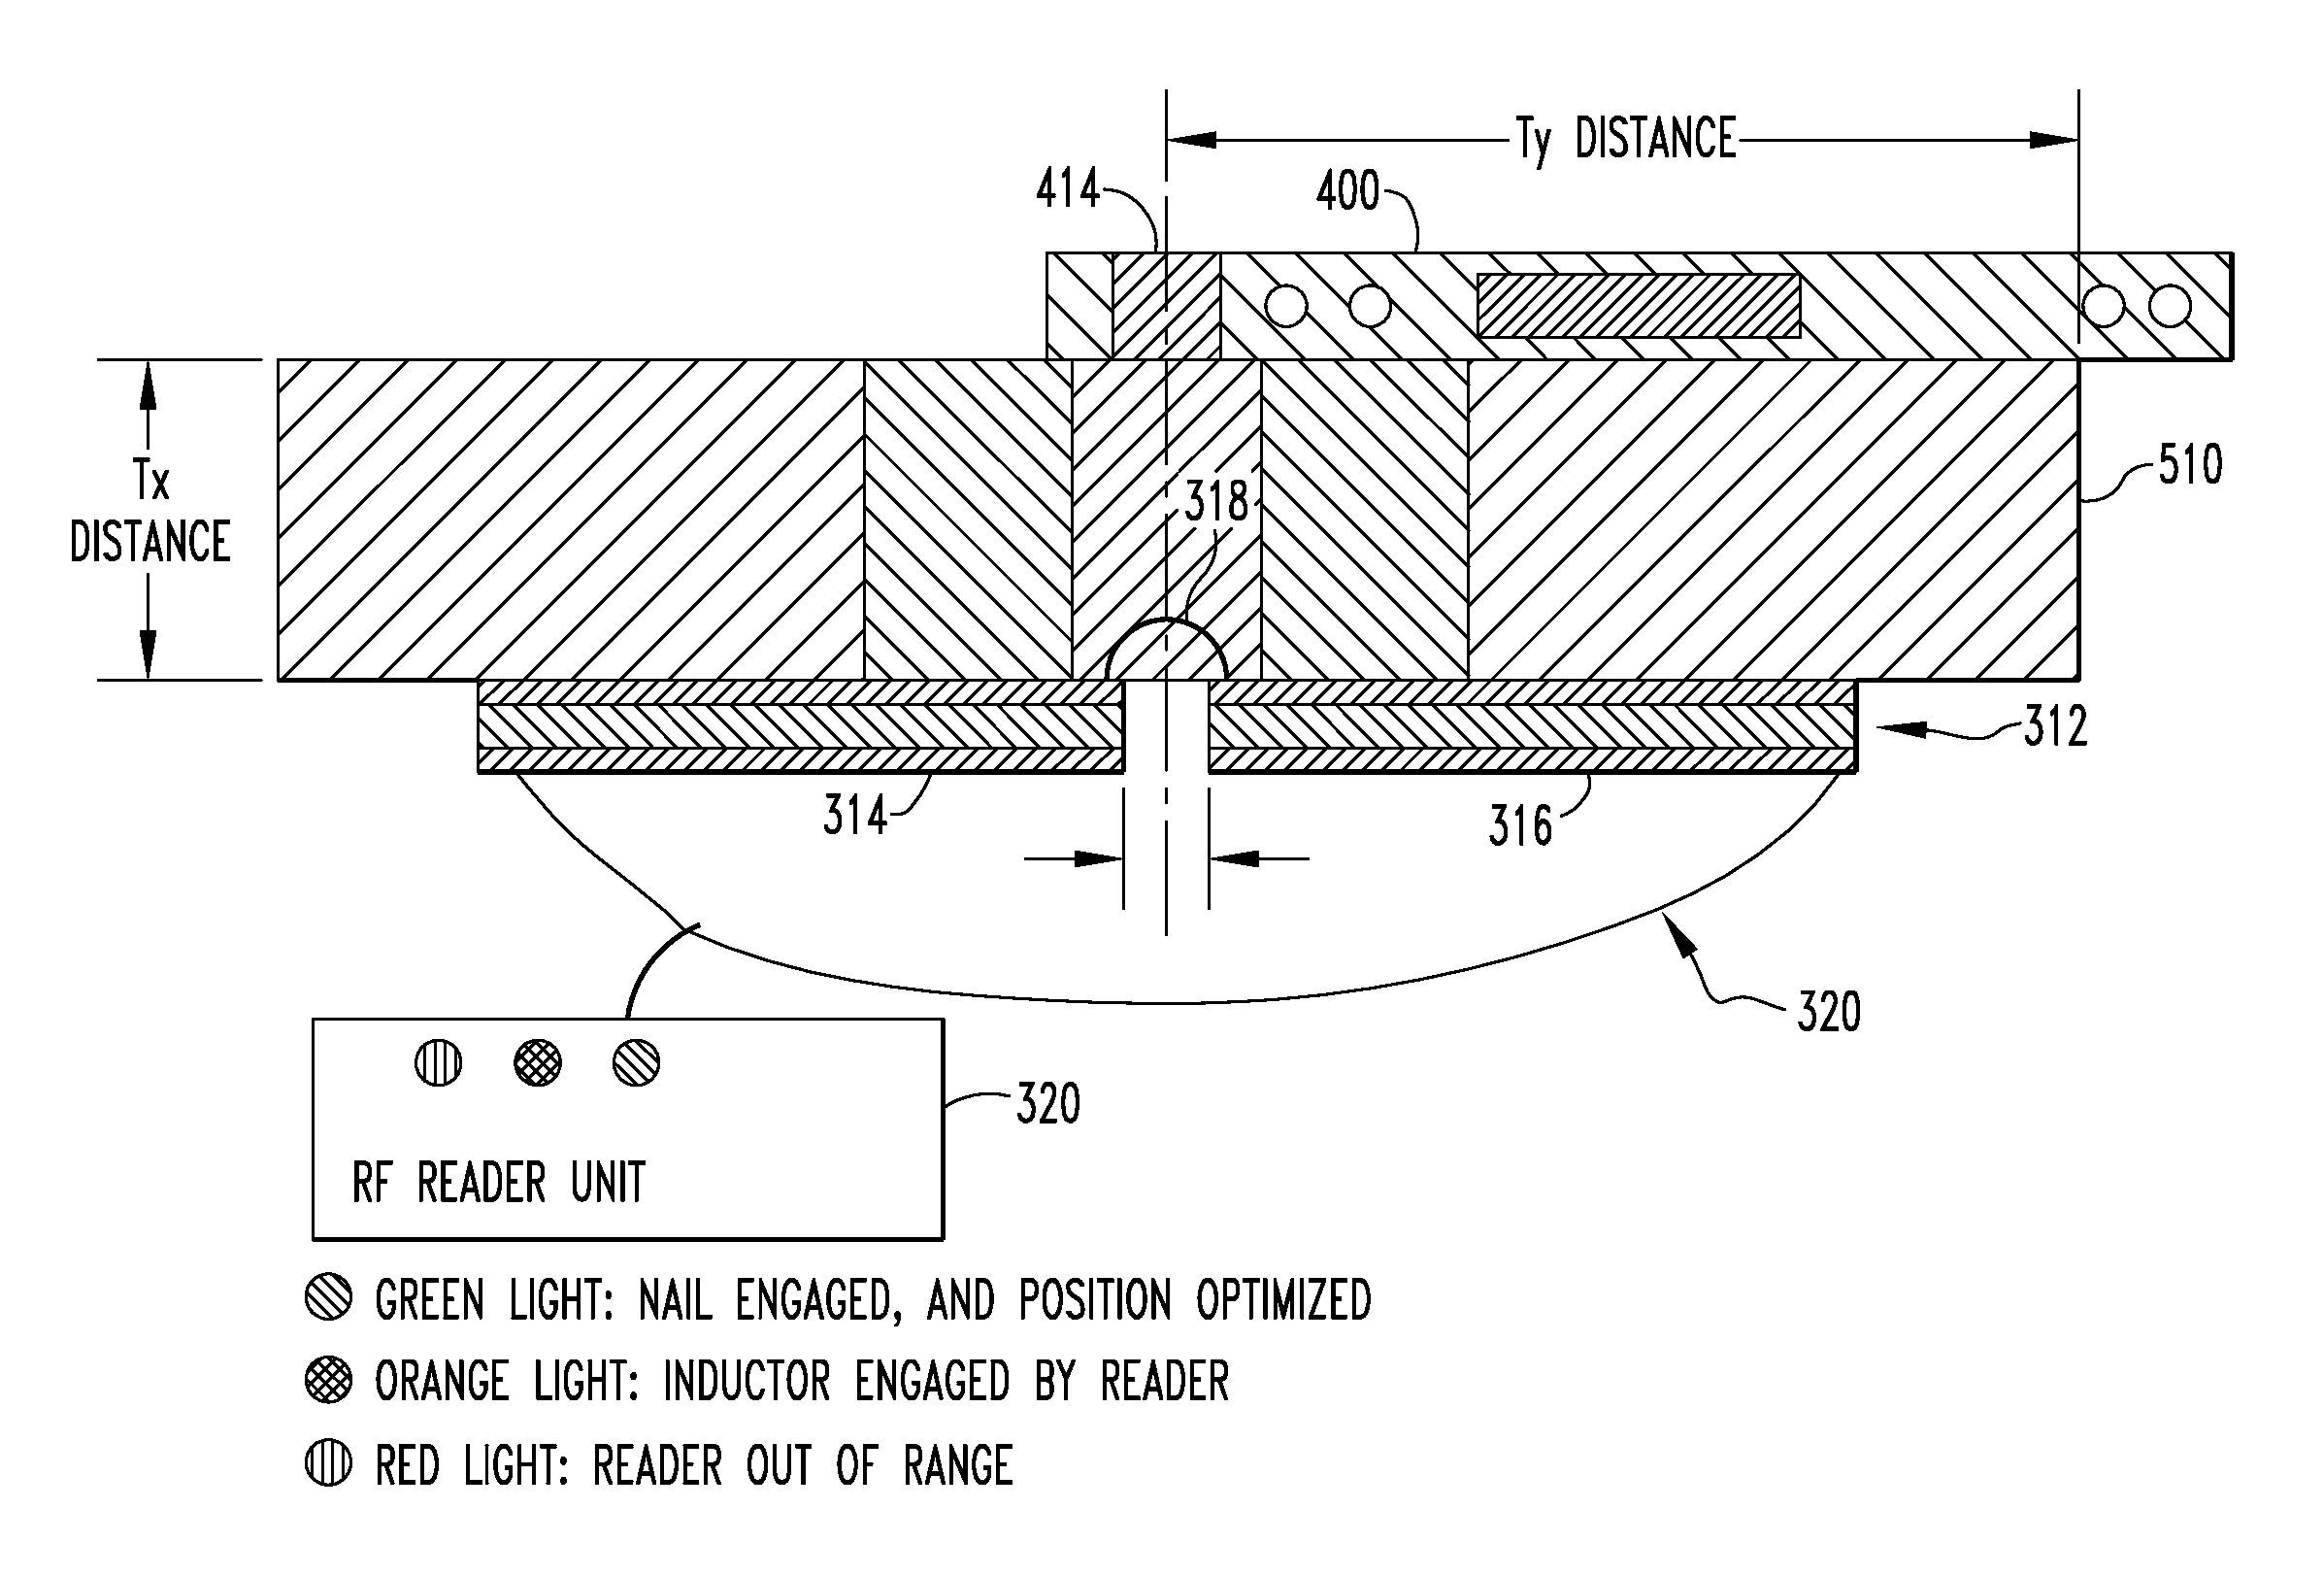 System and method for communicating with a telemetric implant